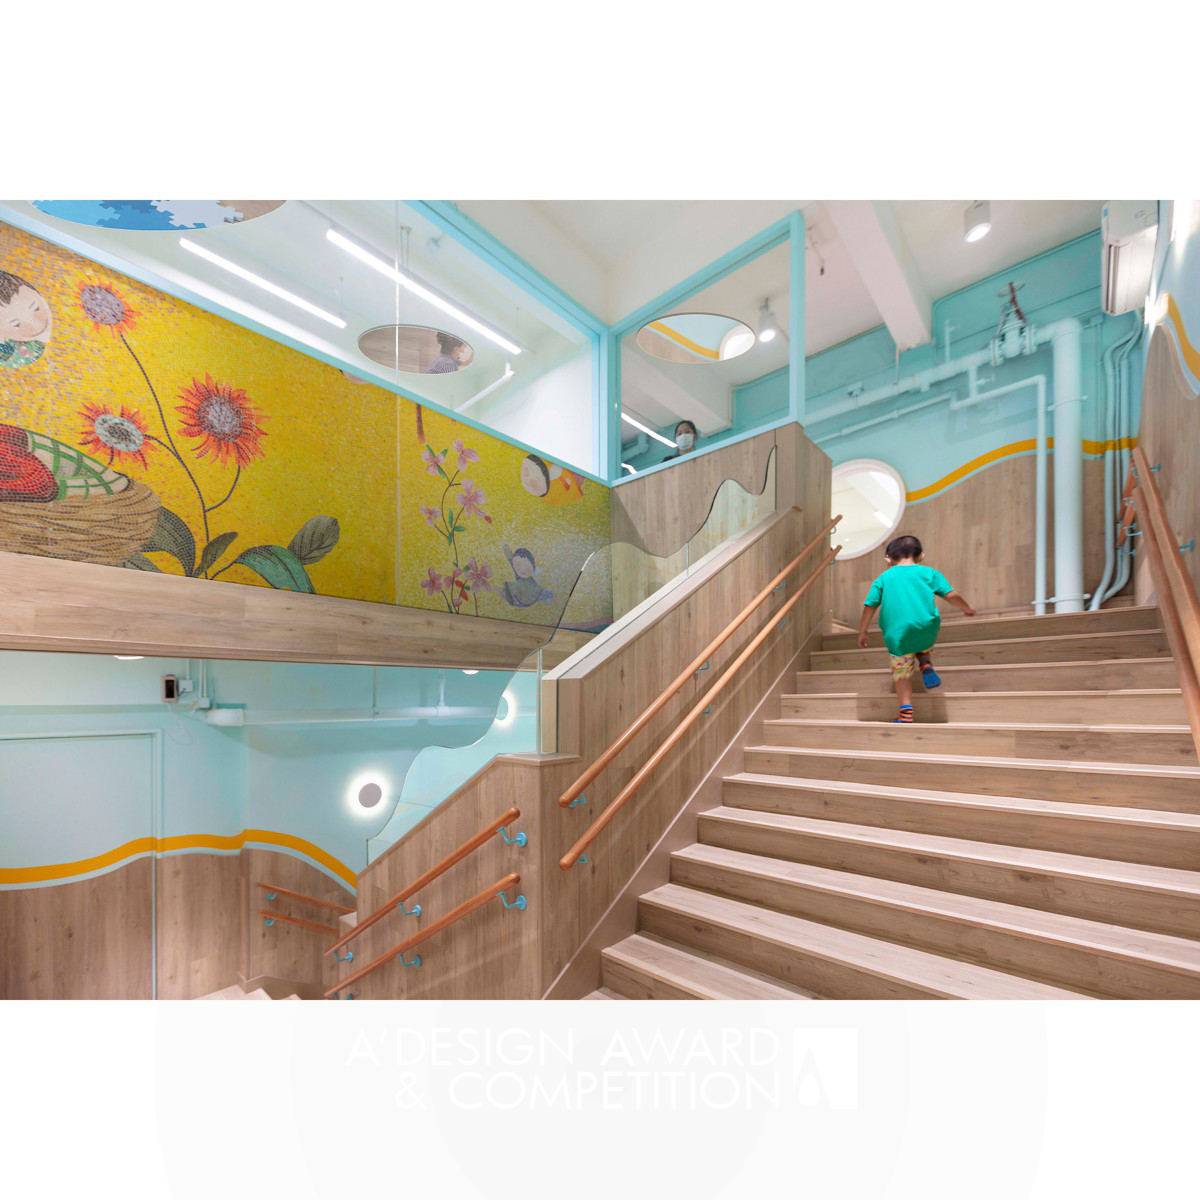 OneSky Global Centre NGO School by Vicky Chan Iron Interior Space and Exhibition Design Award Winner 2021 